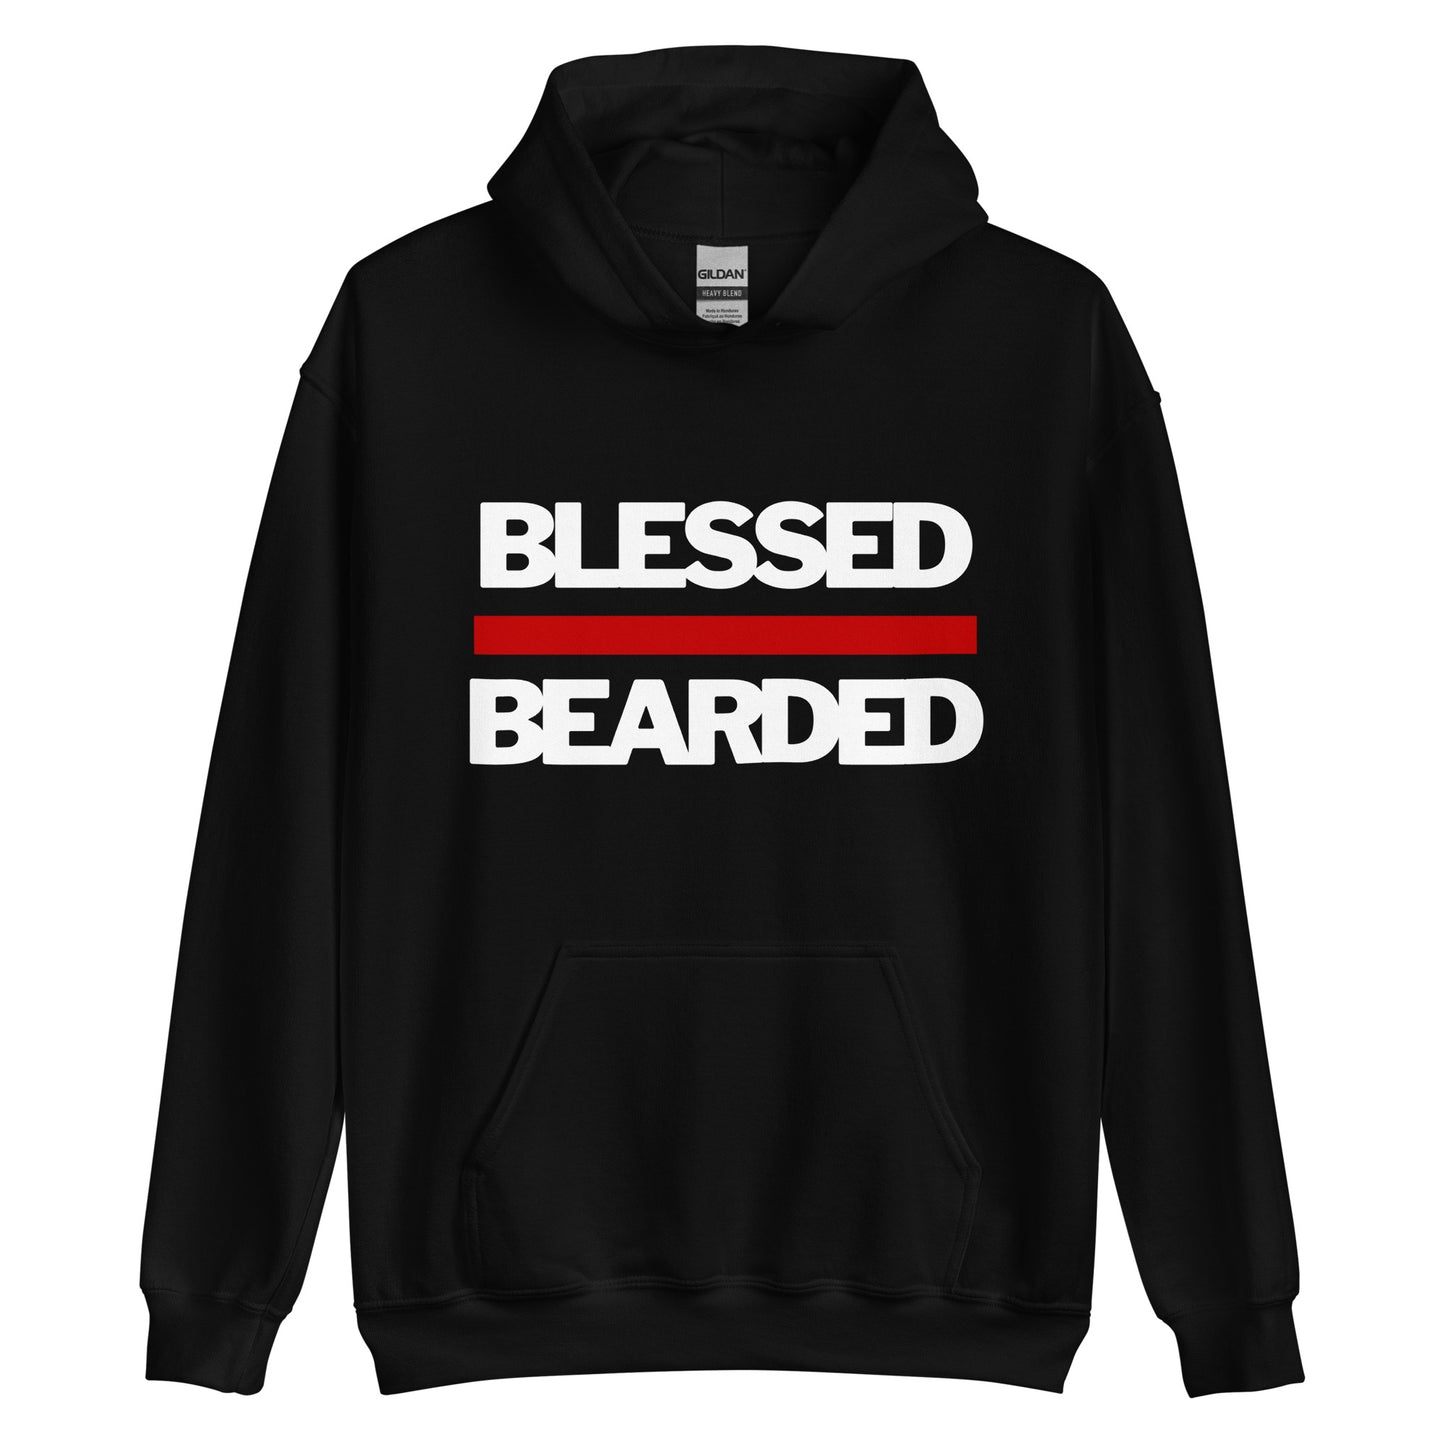 Blessed and Bearded Hoodie